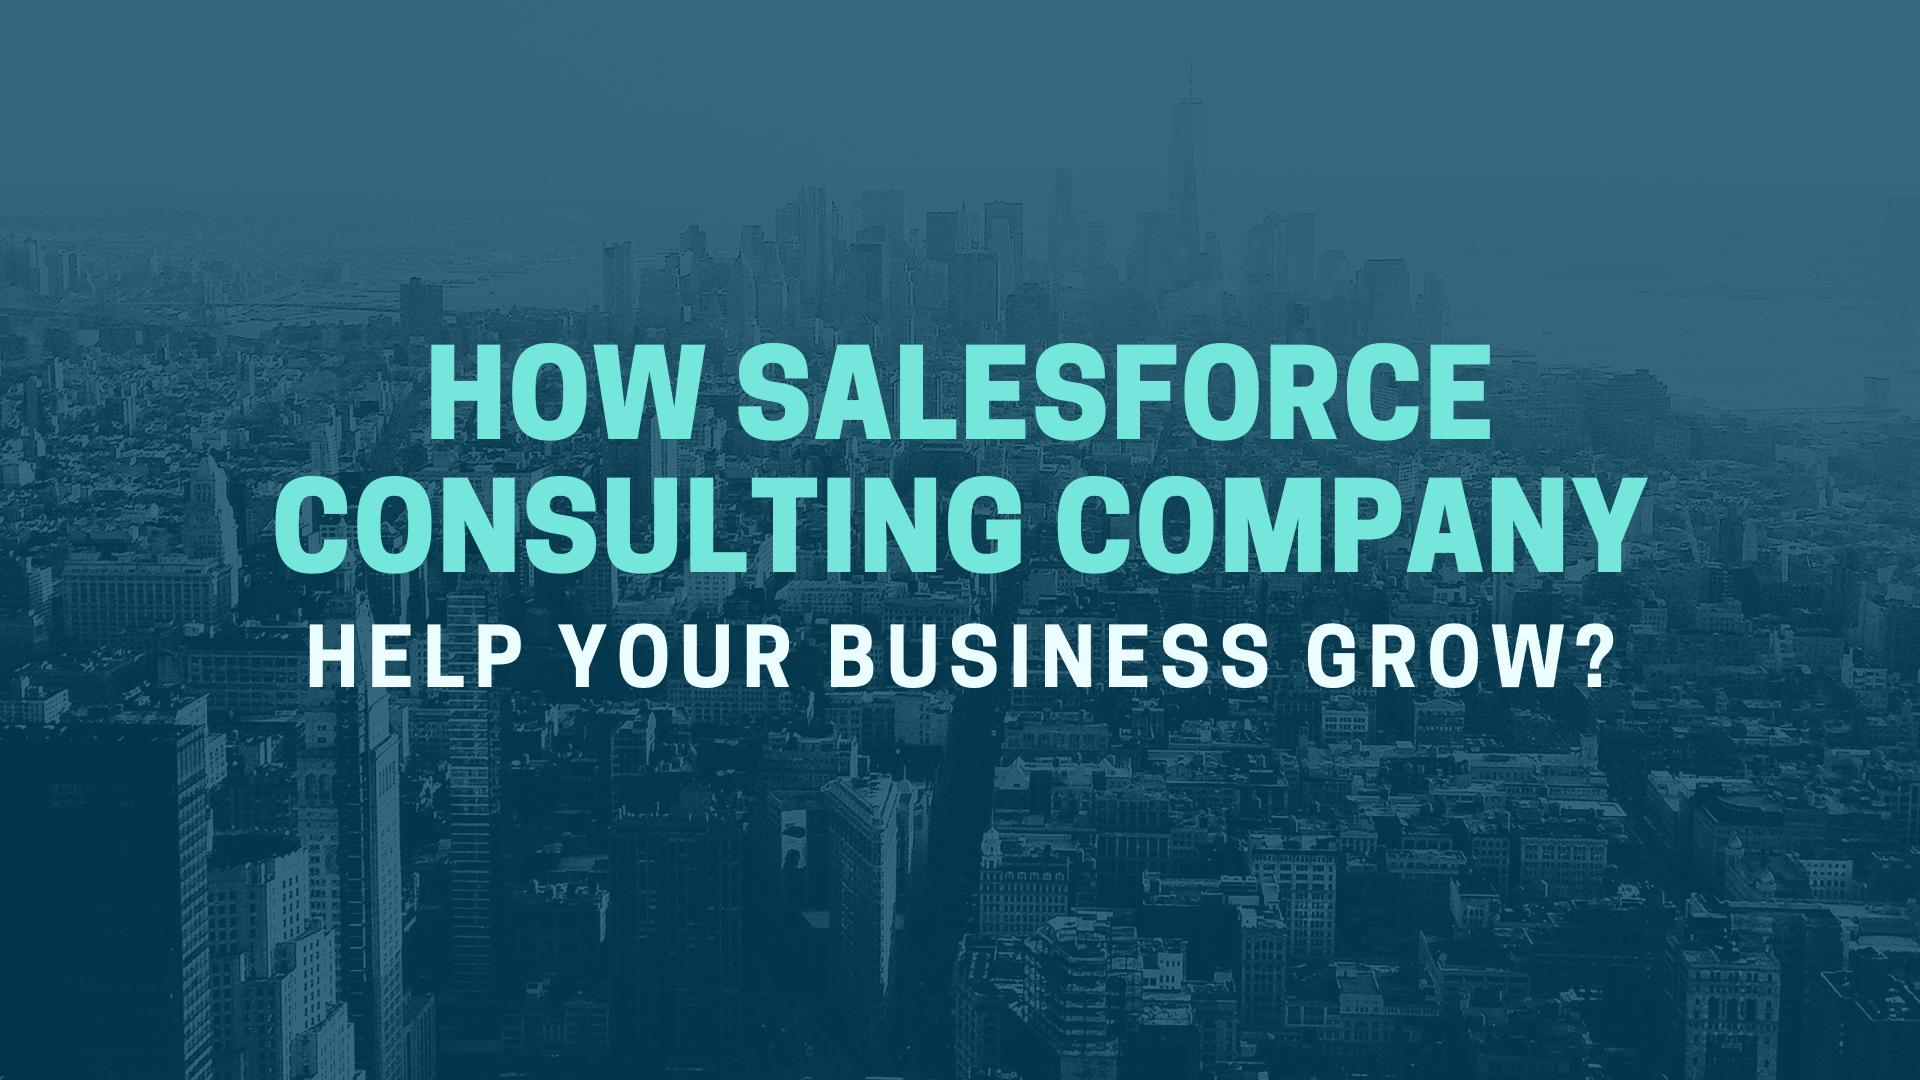 How Salesforce Consulting Company Can Help Your Business Grow